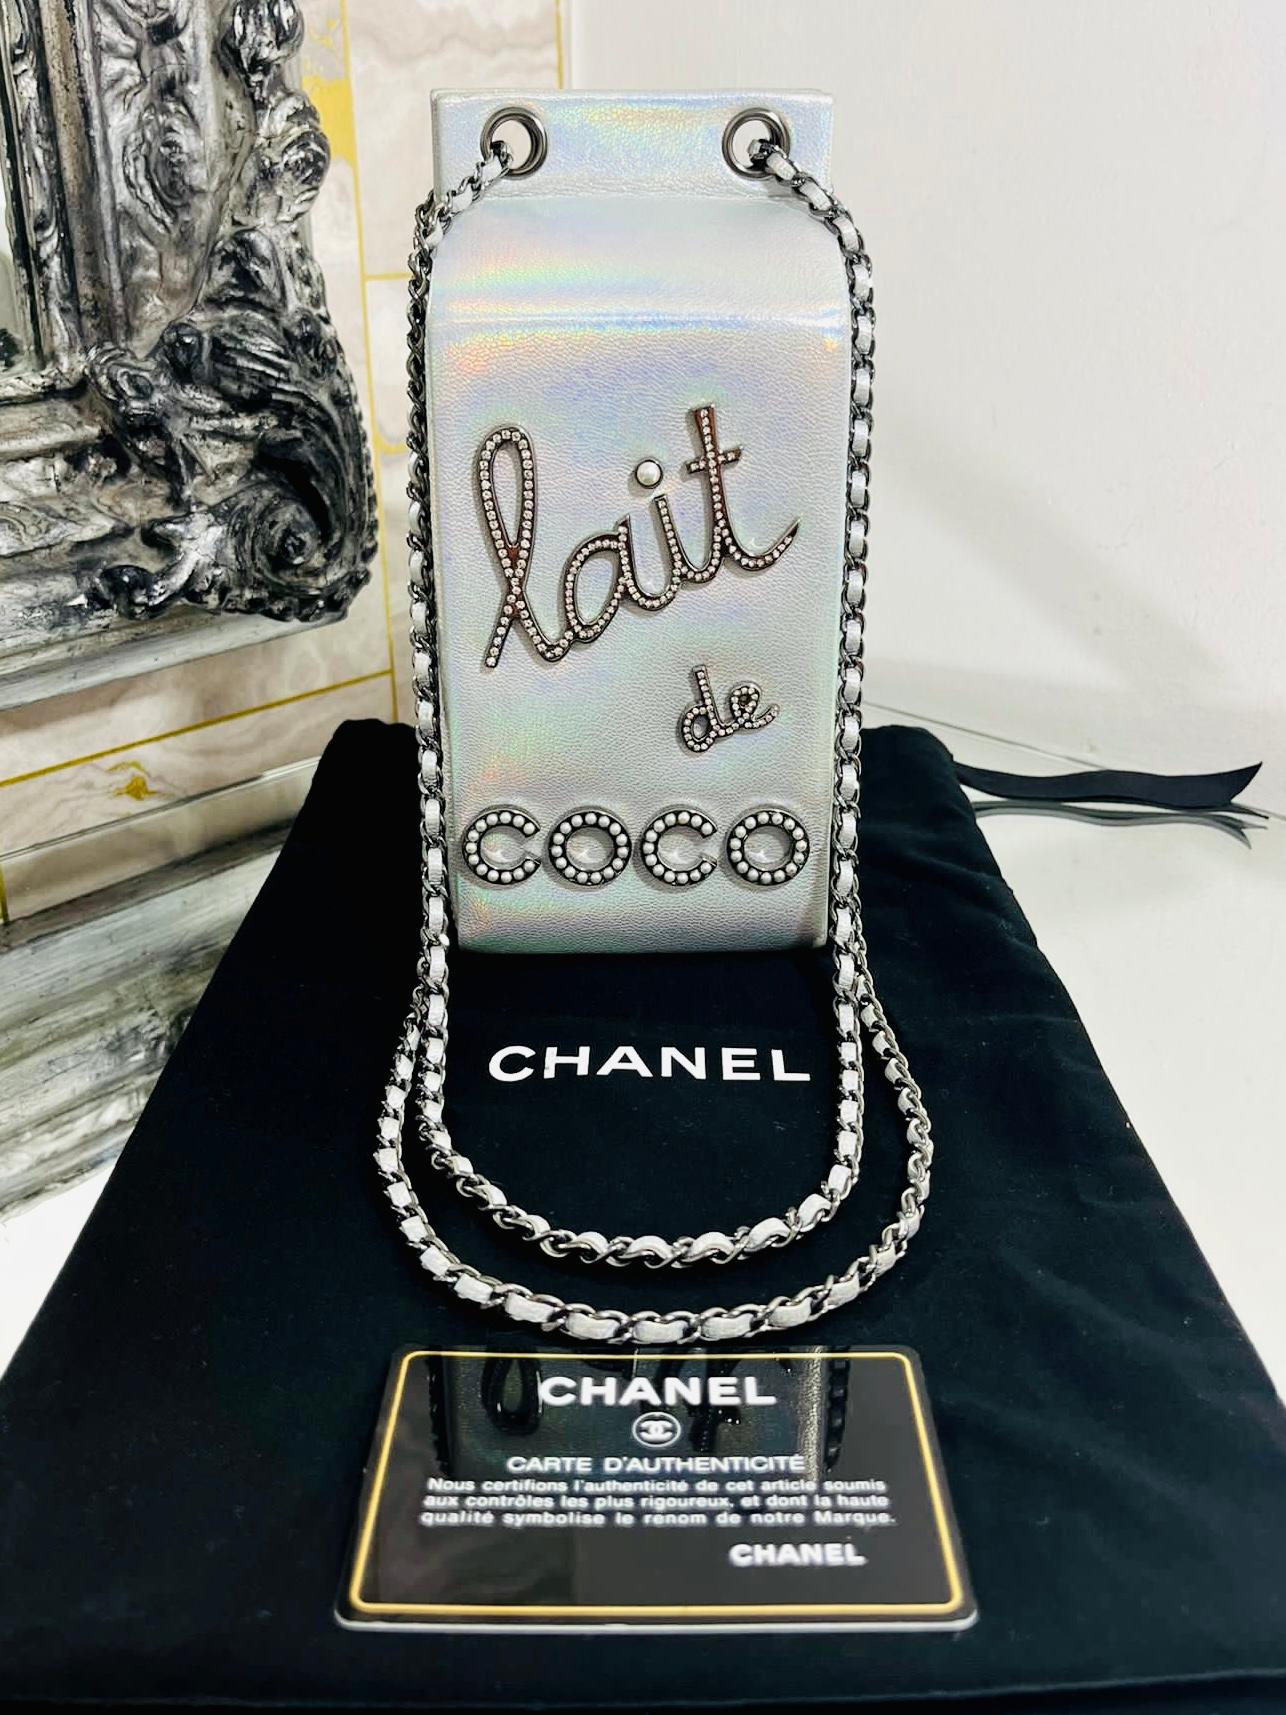 Chanel Iridescent Leather Milk Carton Handbag From The Supermarket Collection 2